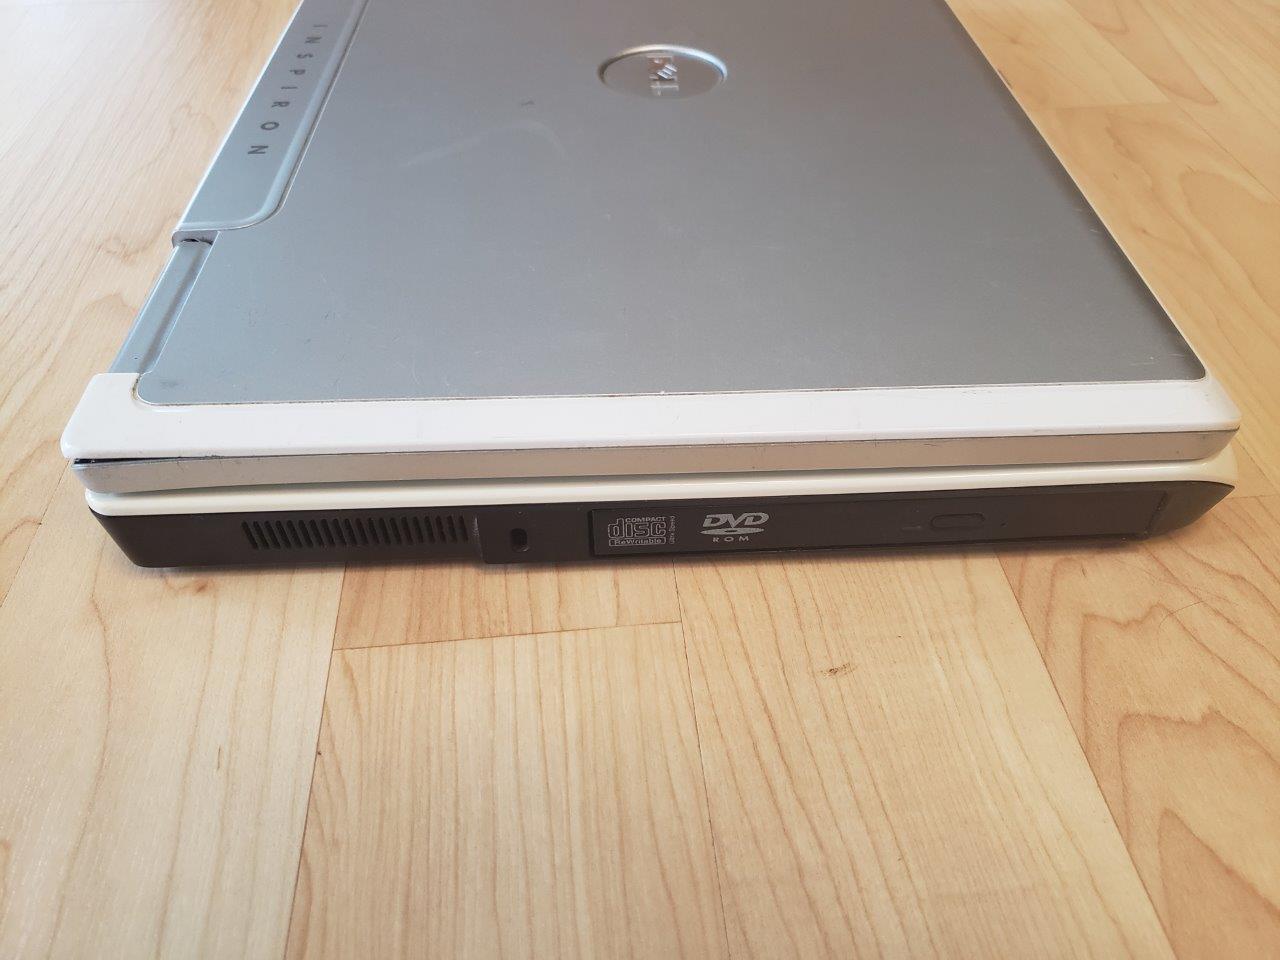 Dell Inspiron 6000 laptop Intel Centrino cpu WinXP/Pro COA hdd caddy for repairs or parts